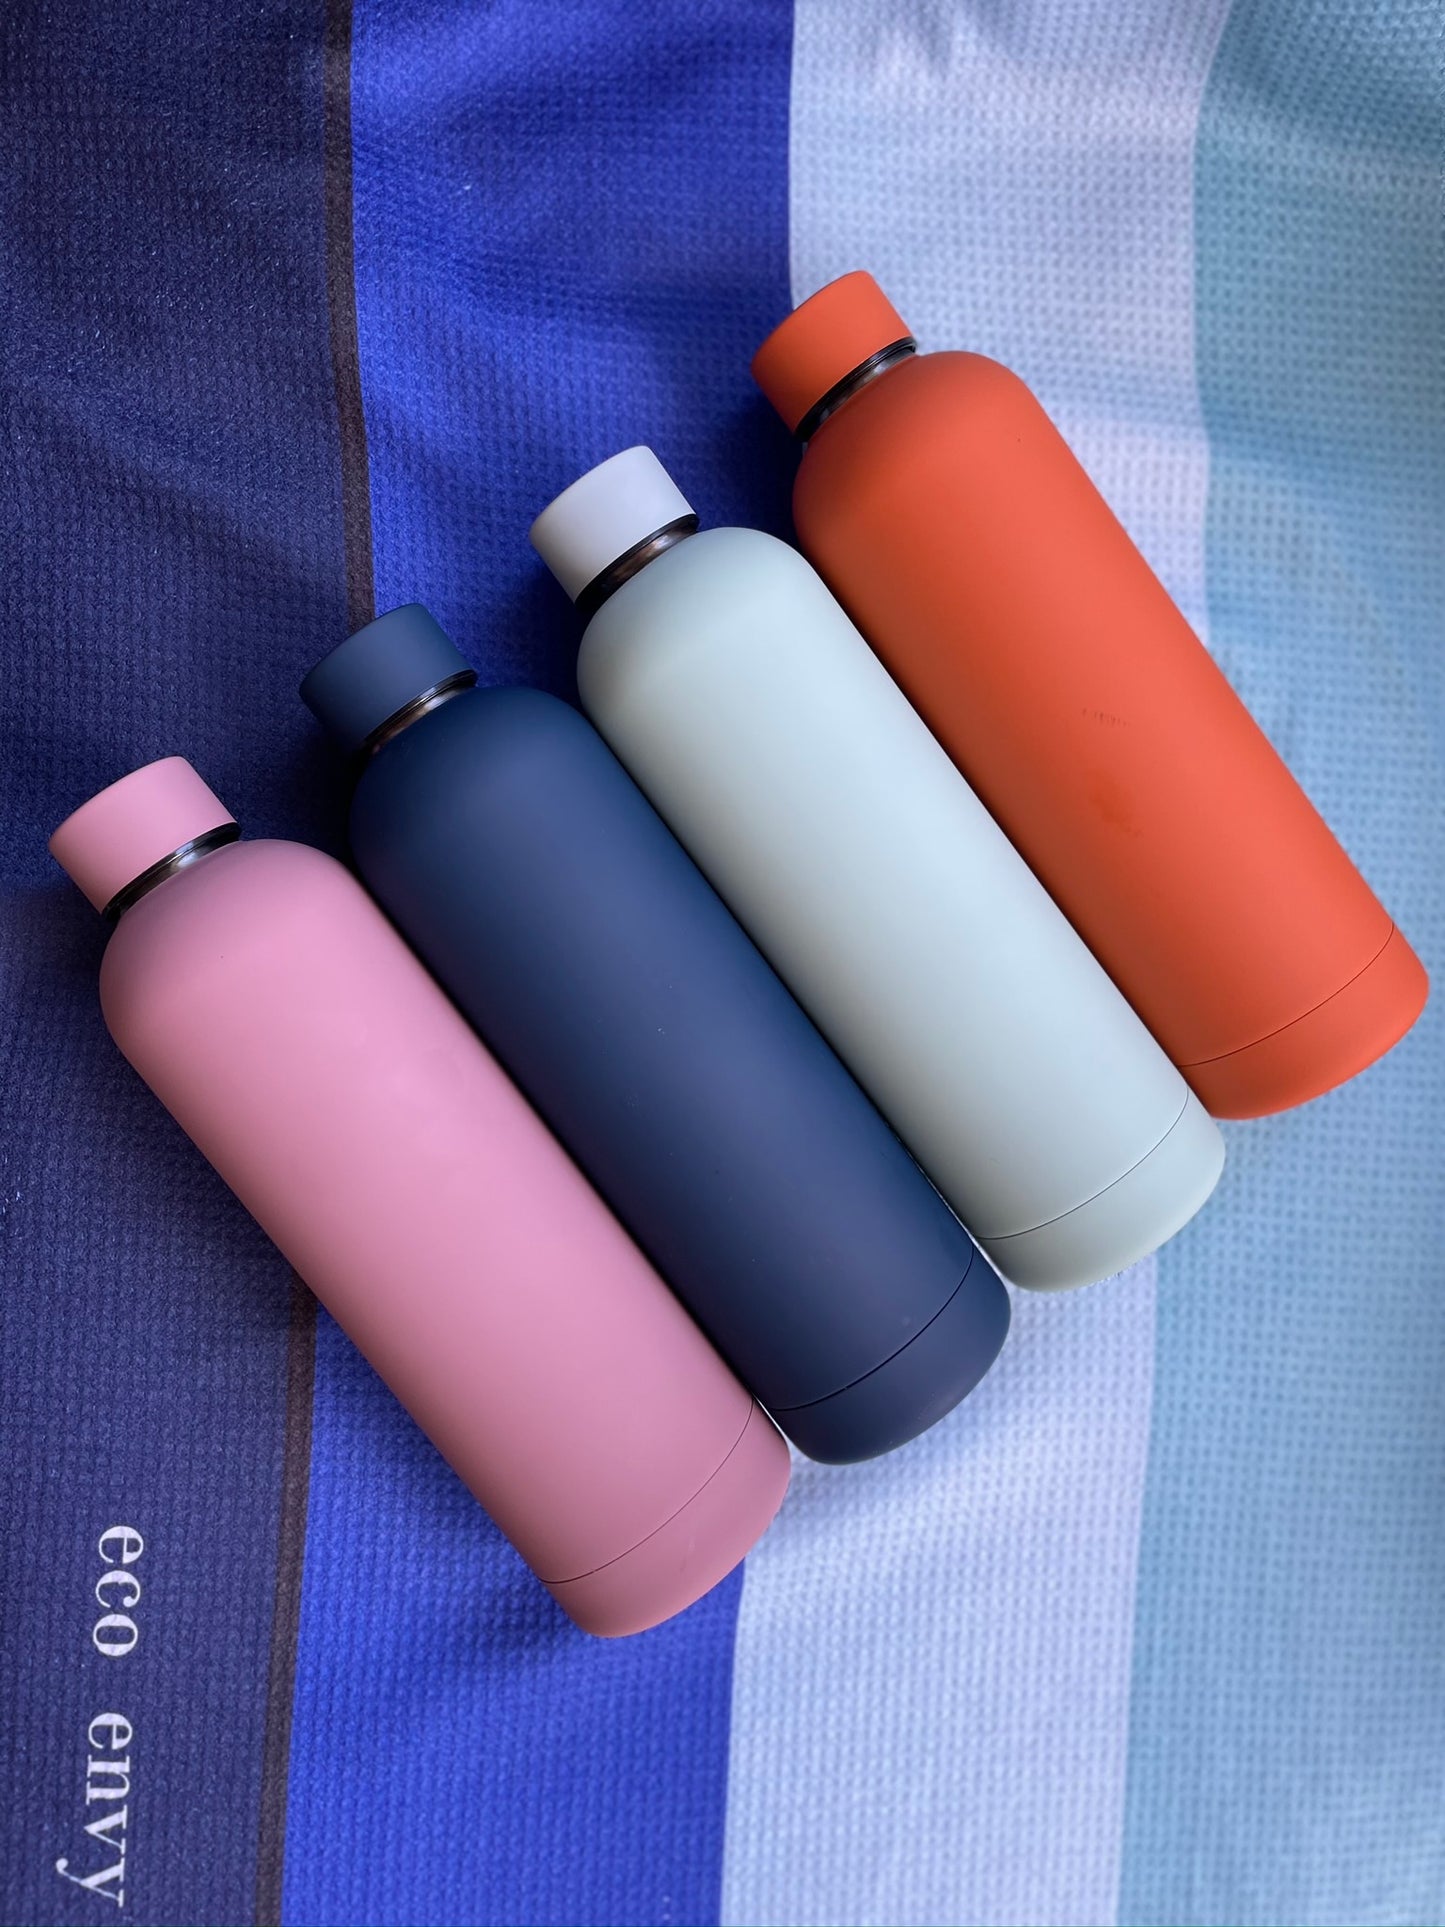 750mL Stainless Steel Water Bottle | Icy Mint